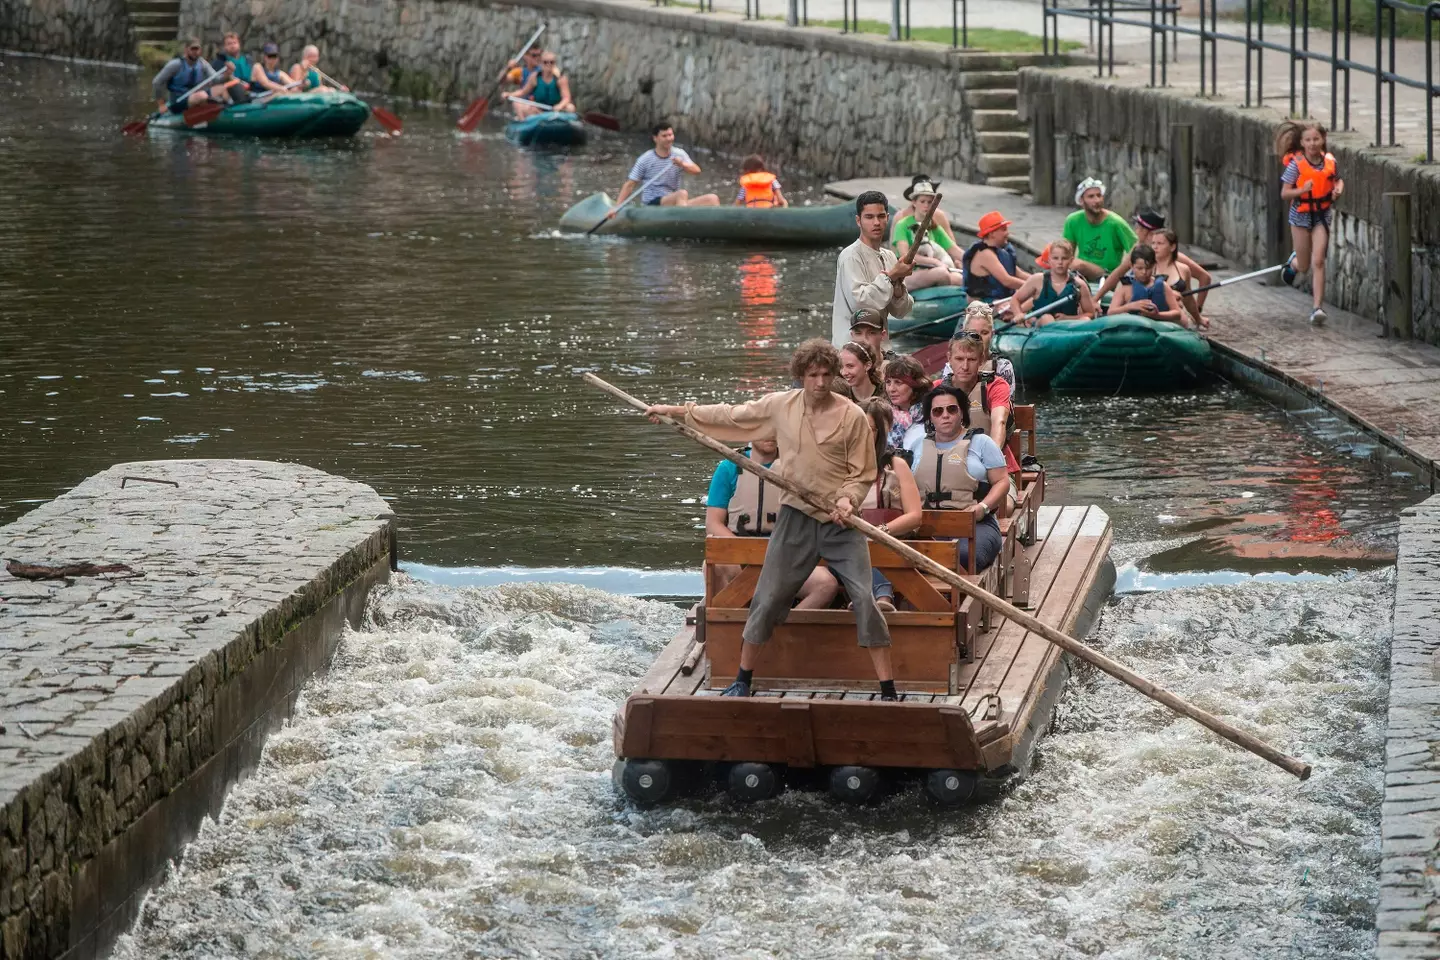 Tourists can enjoy a spot of fun on the river.